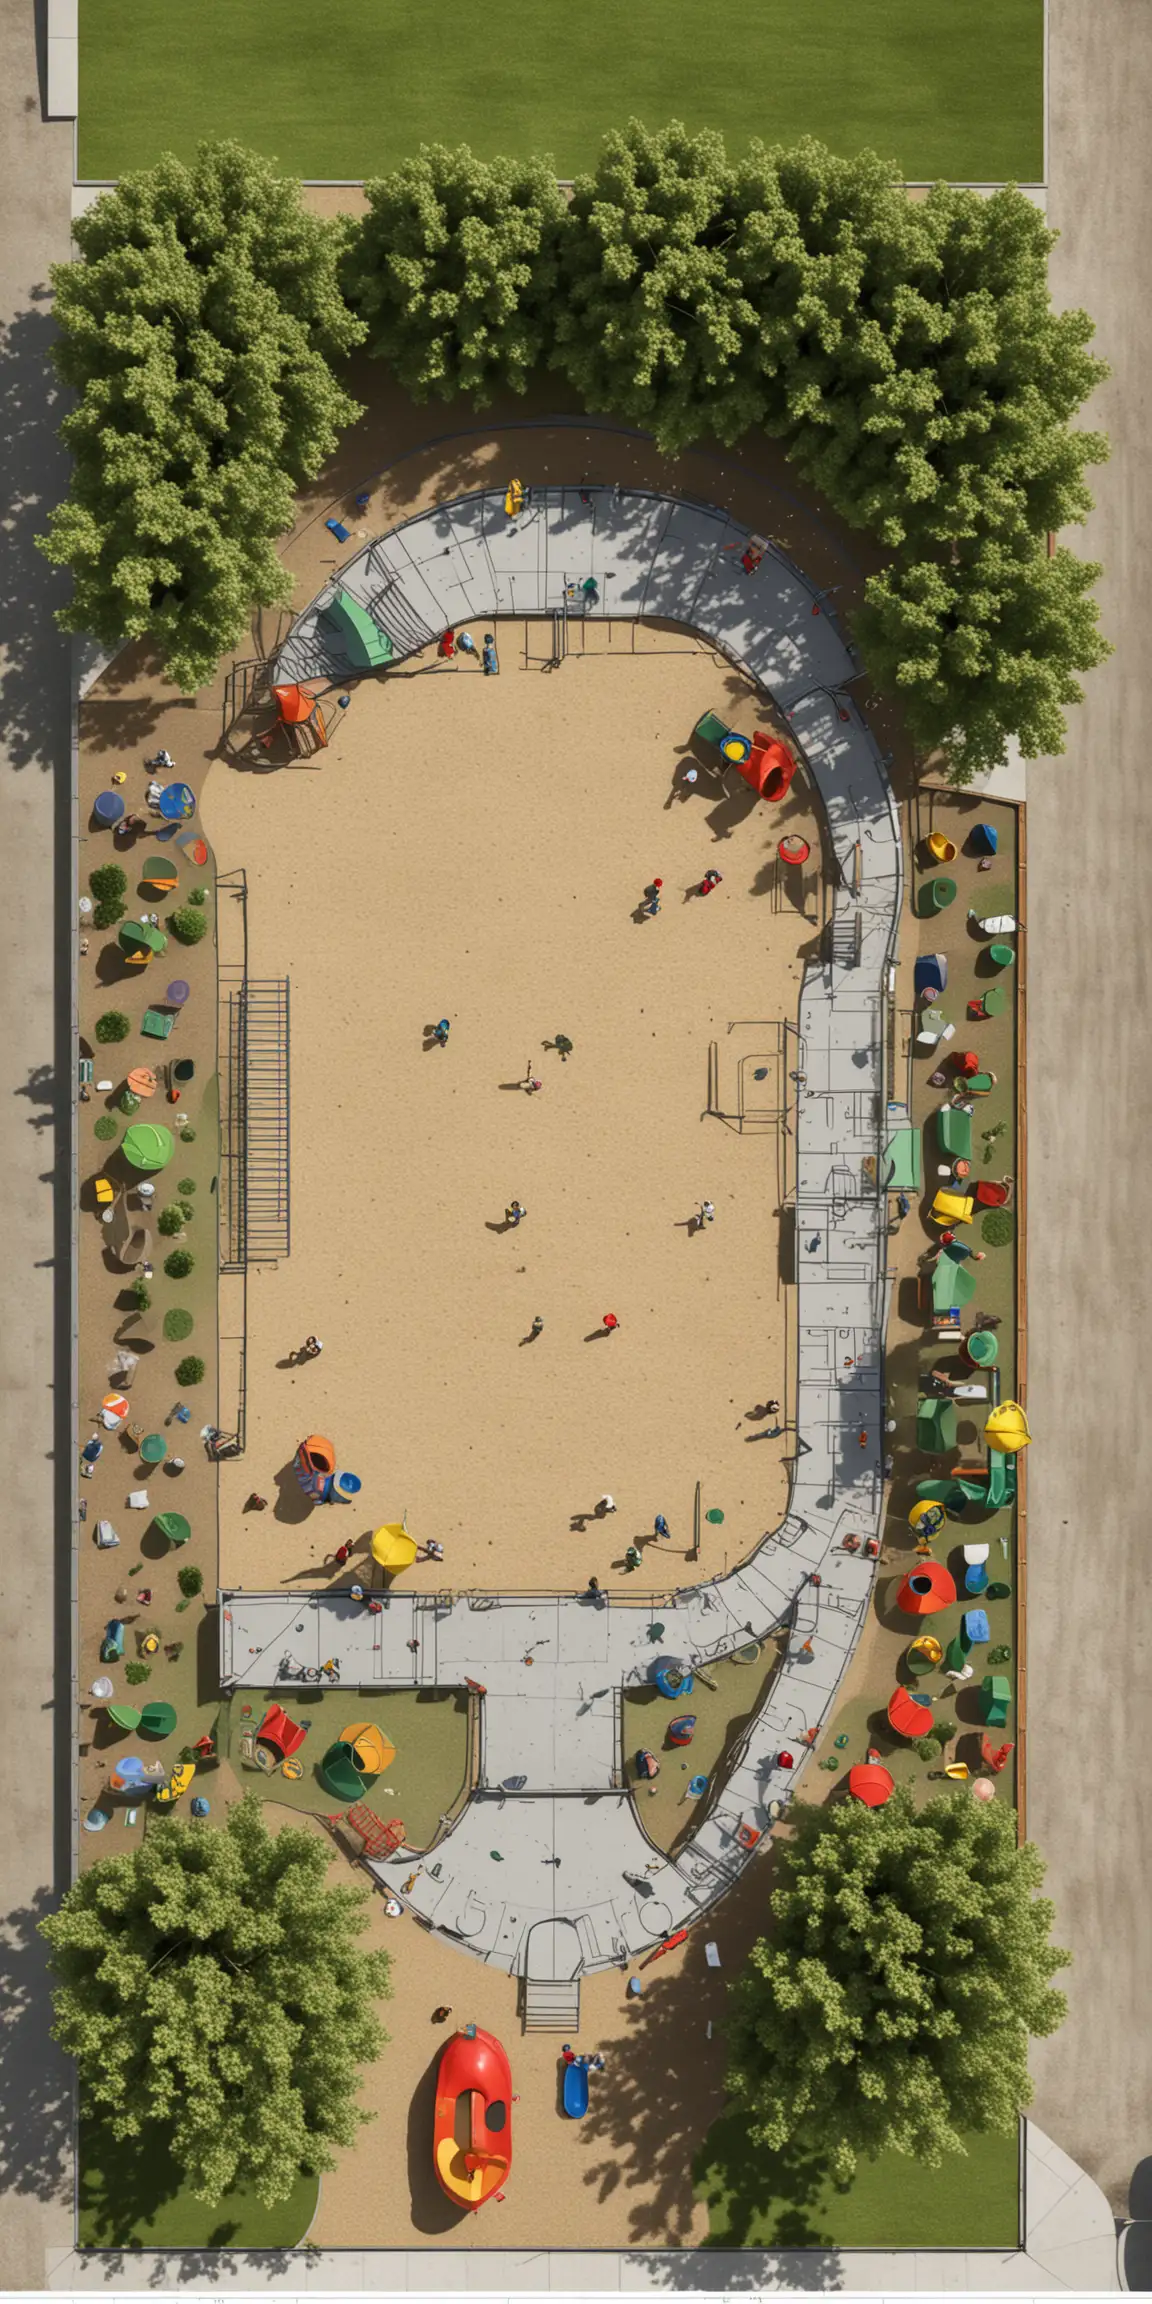 architectural drawing of a playground design in plan view